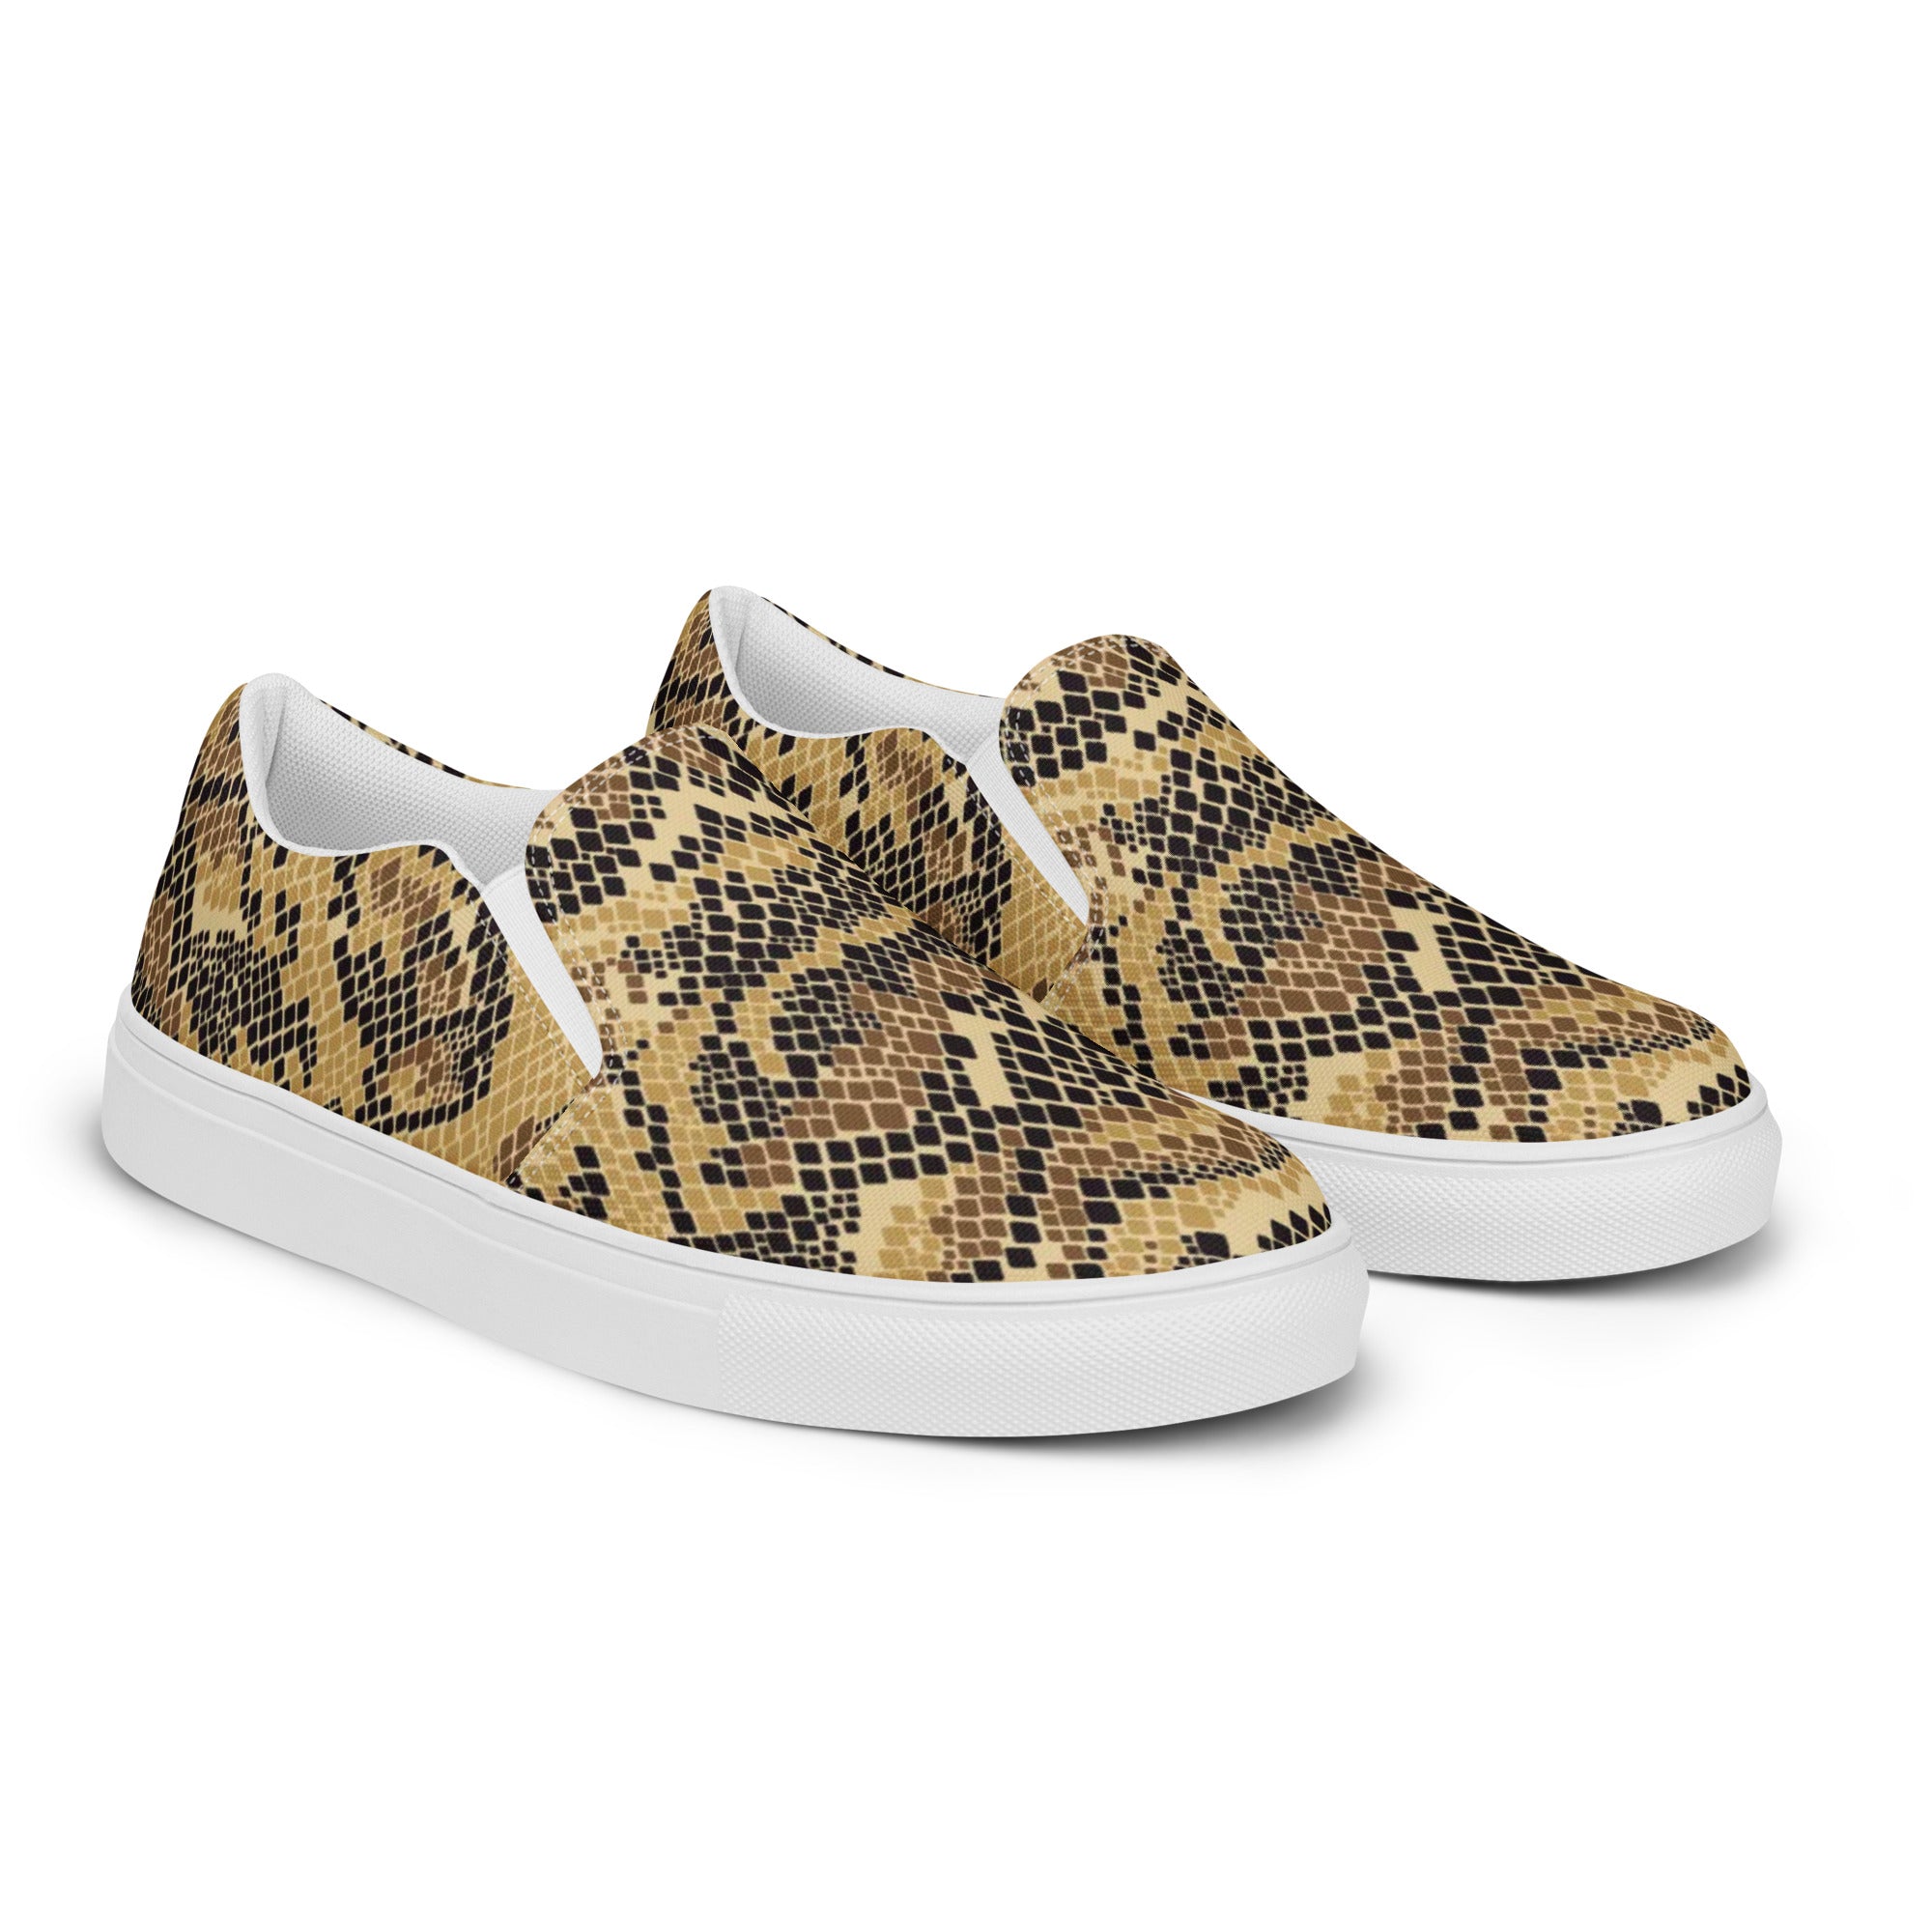 "The Mambas" Men’s Slip-on Canvas Shoes